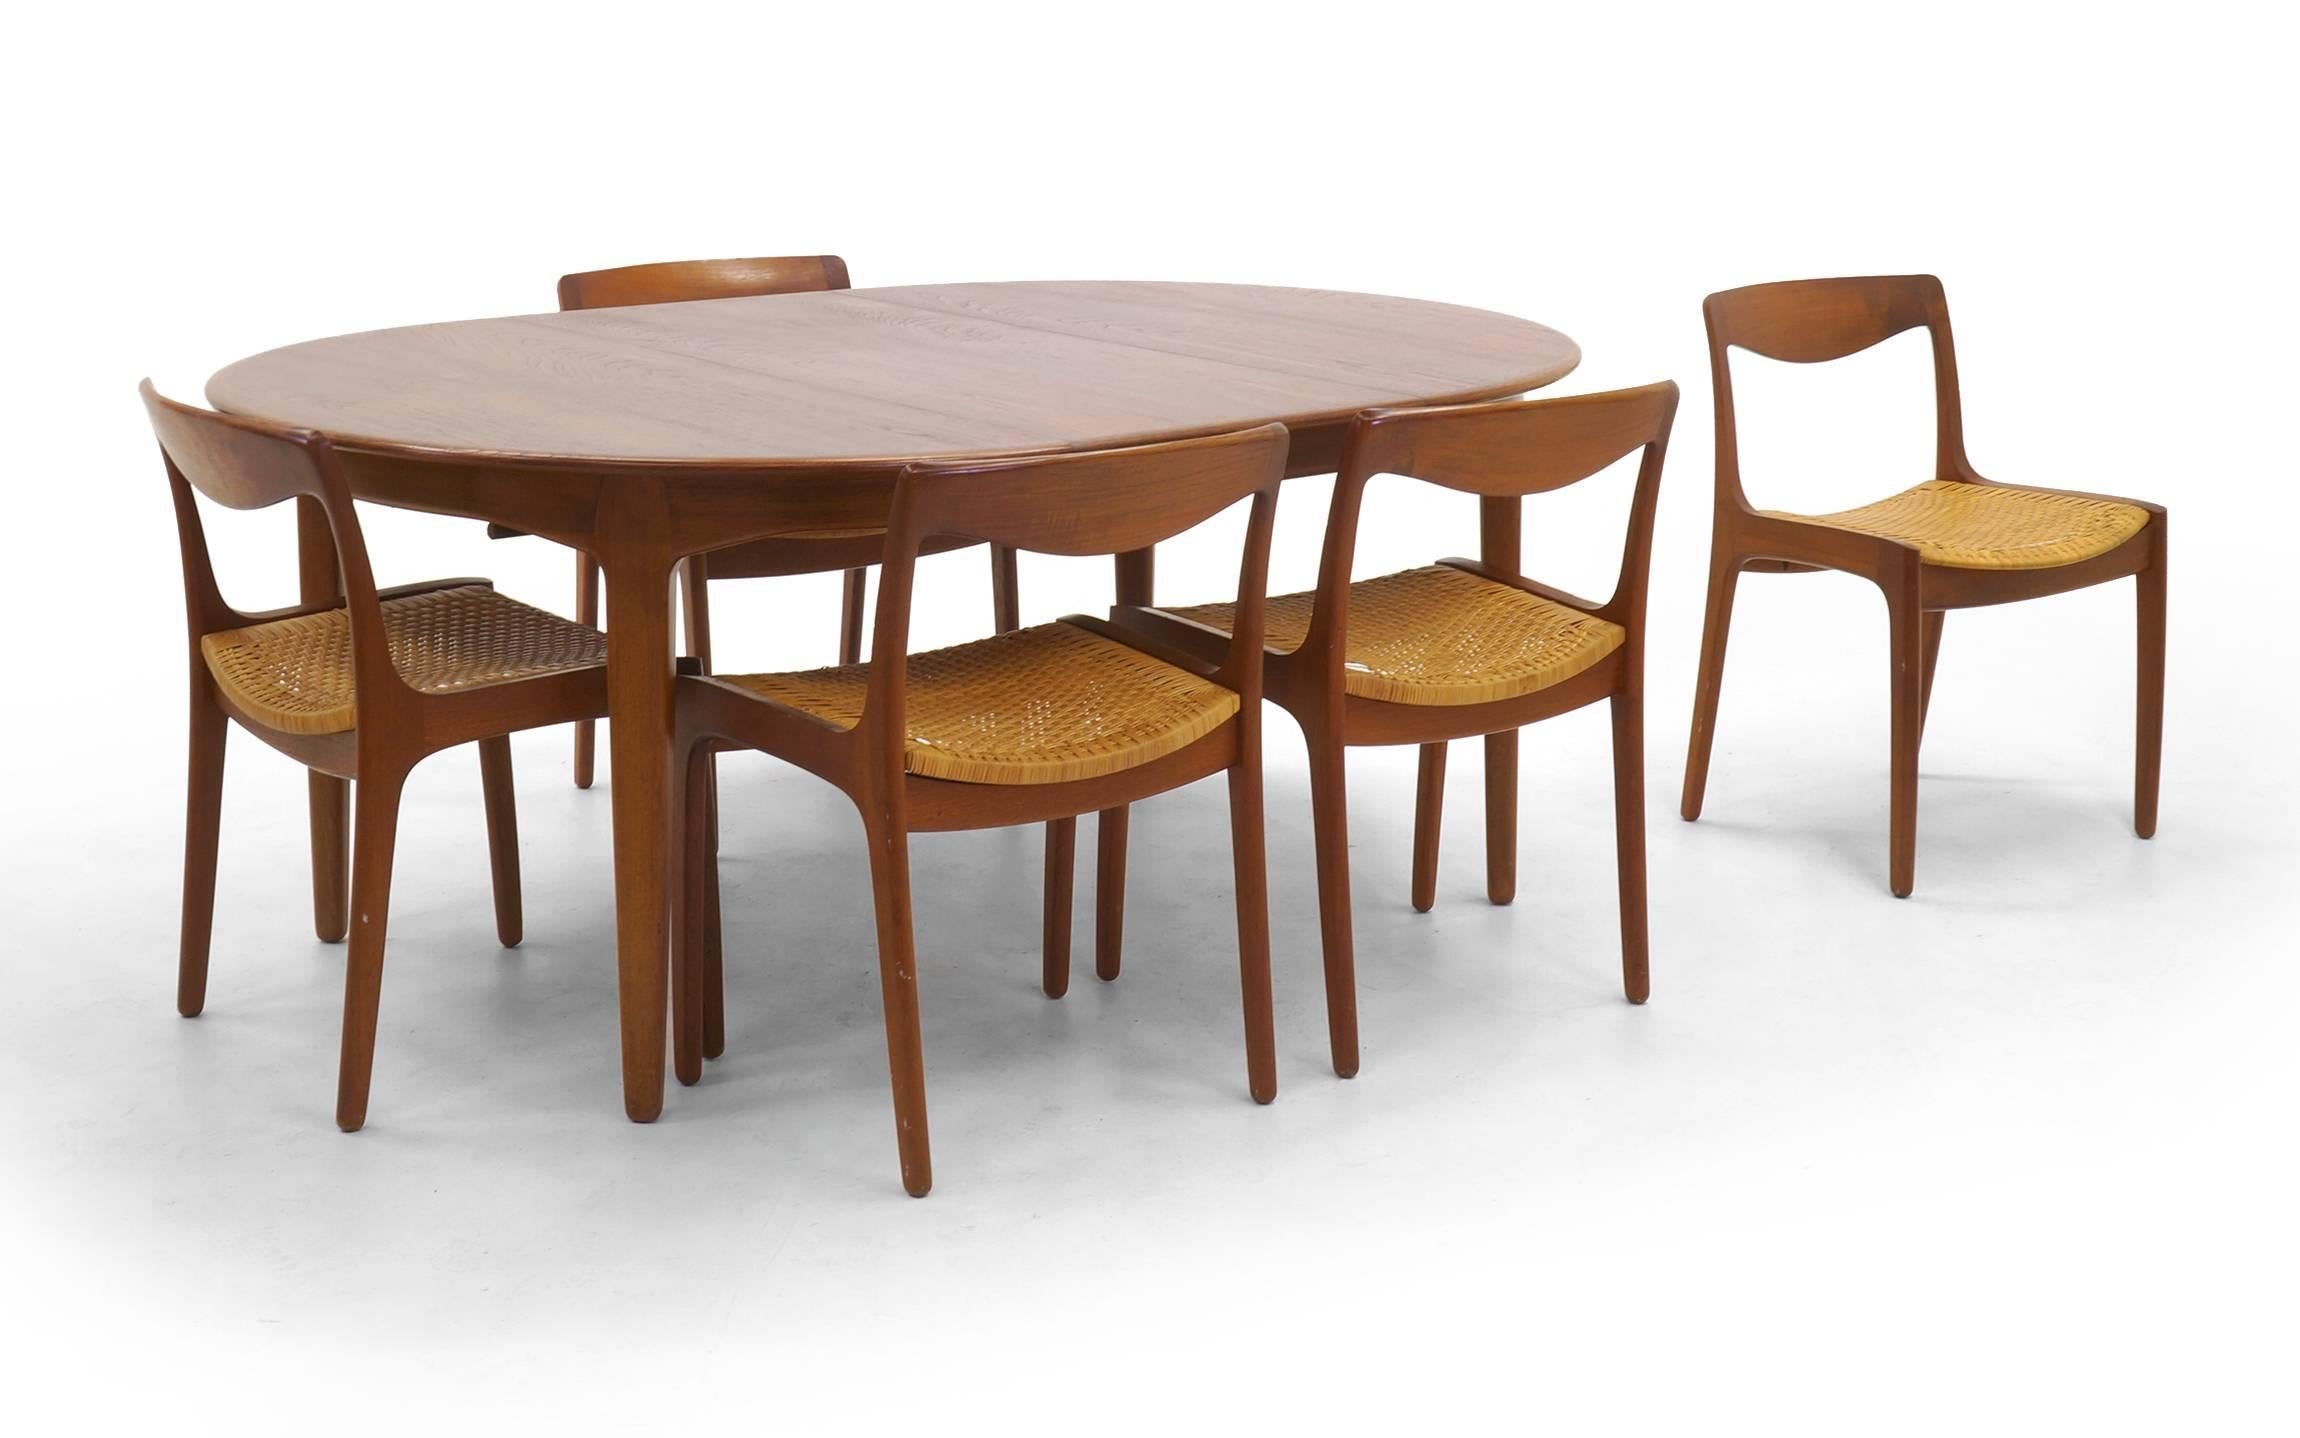 Mid-20th Century Teak Extension Dining Table by Soro Stole, Denmark & 8 chairs by Vilhelm Wohlert